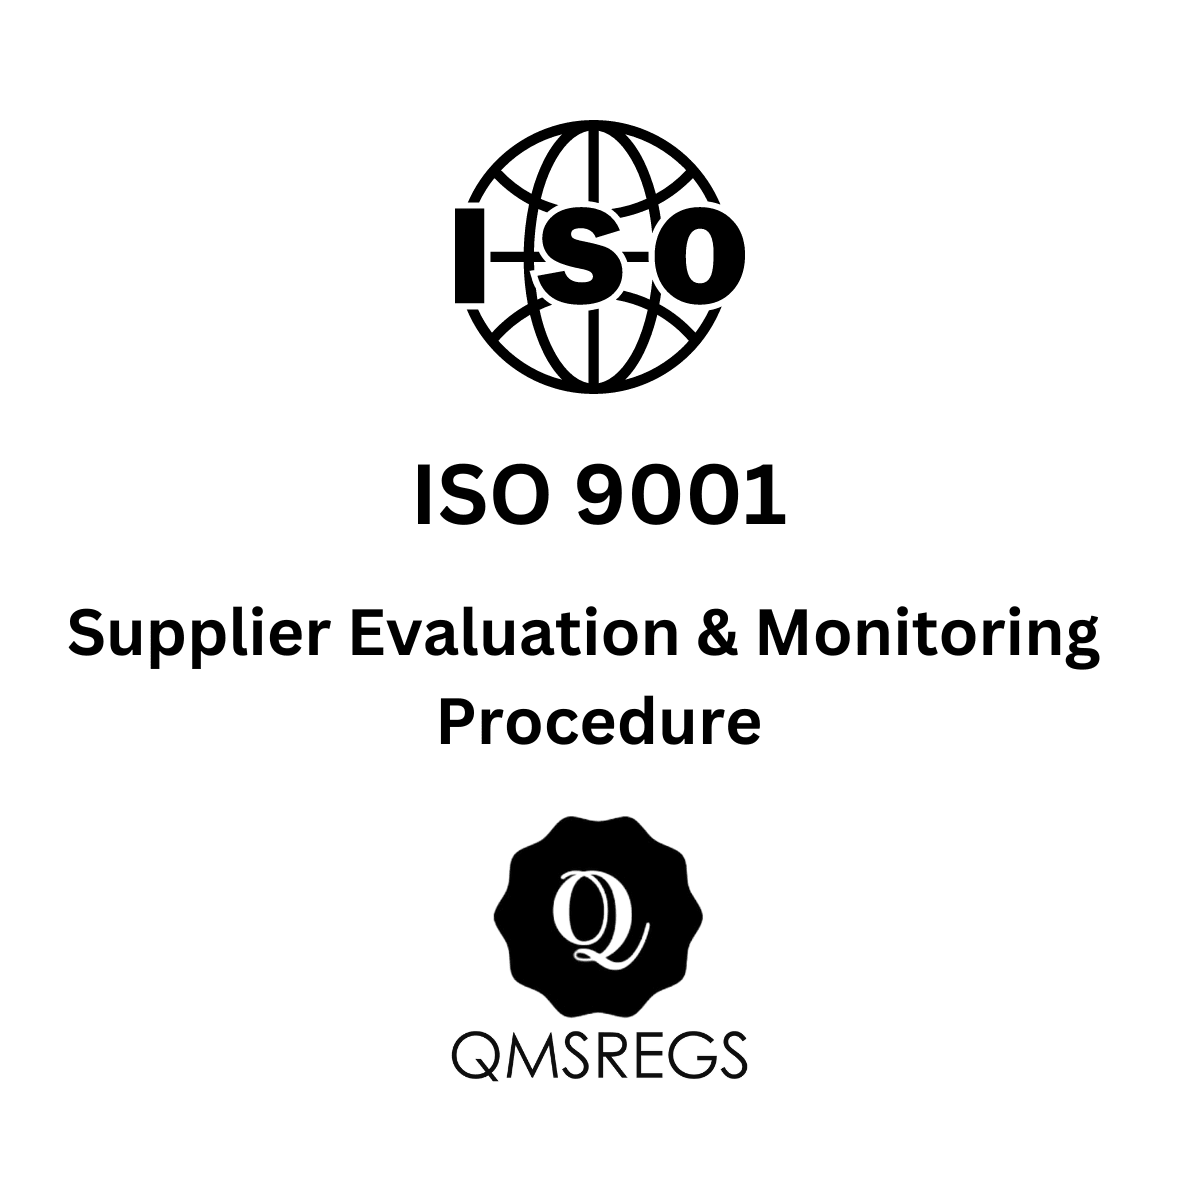 ISO 9001 Supplier Evaluation and Monitoring Procedure Template